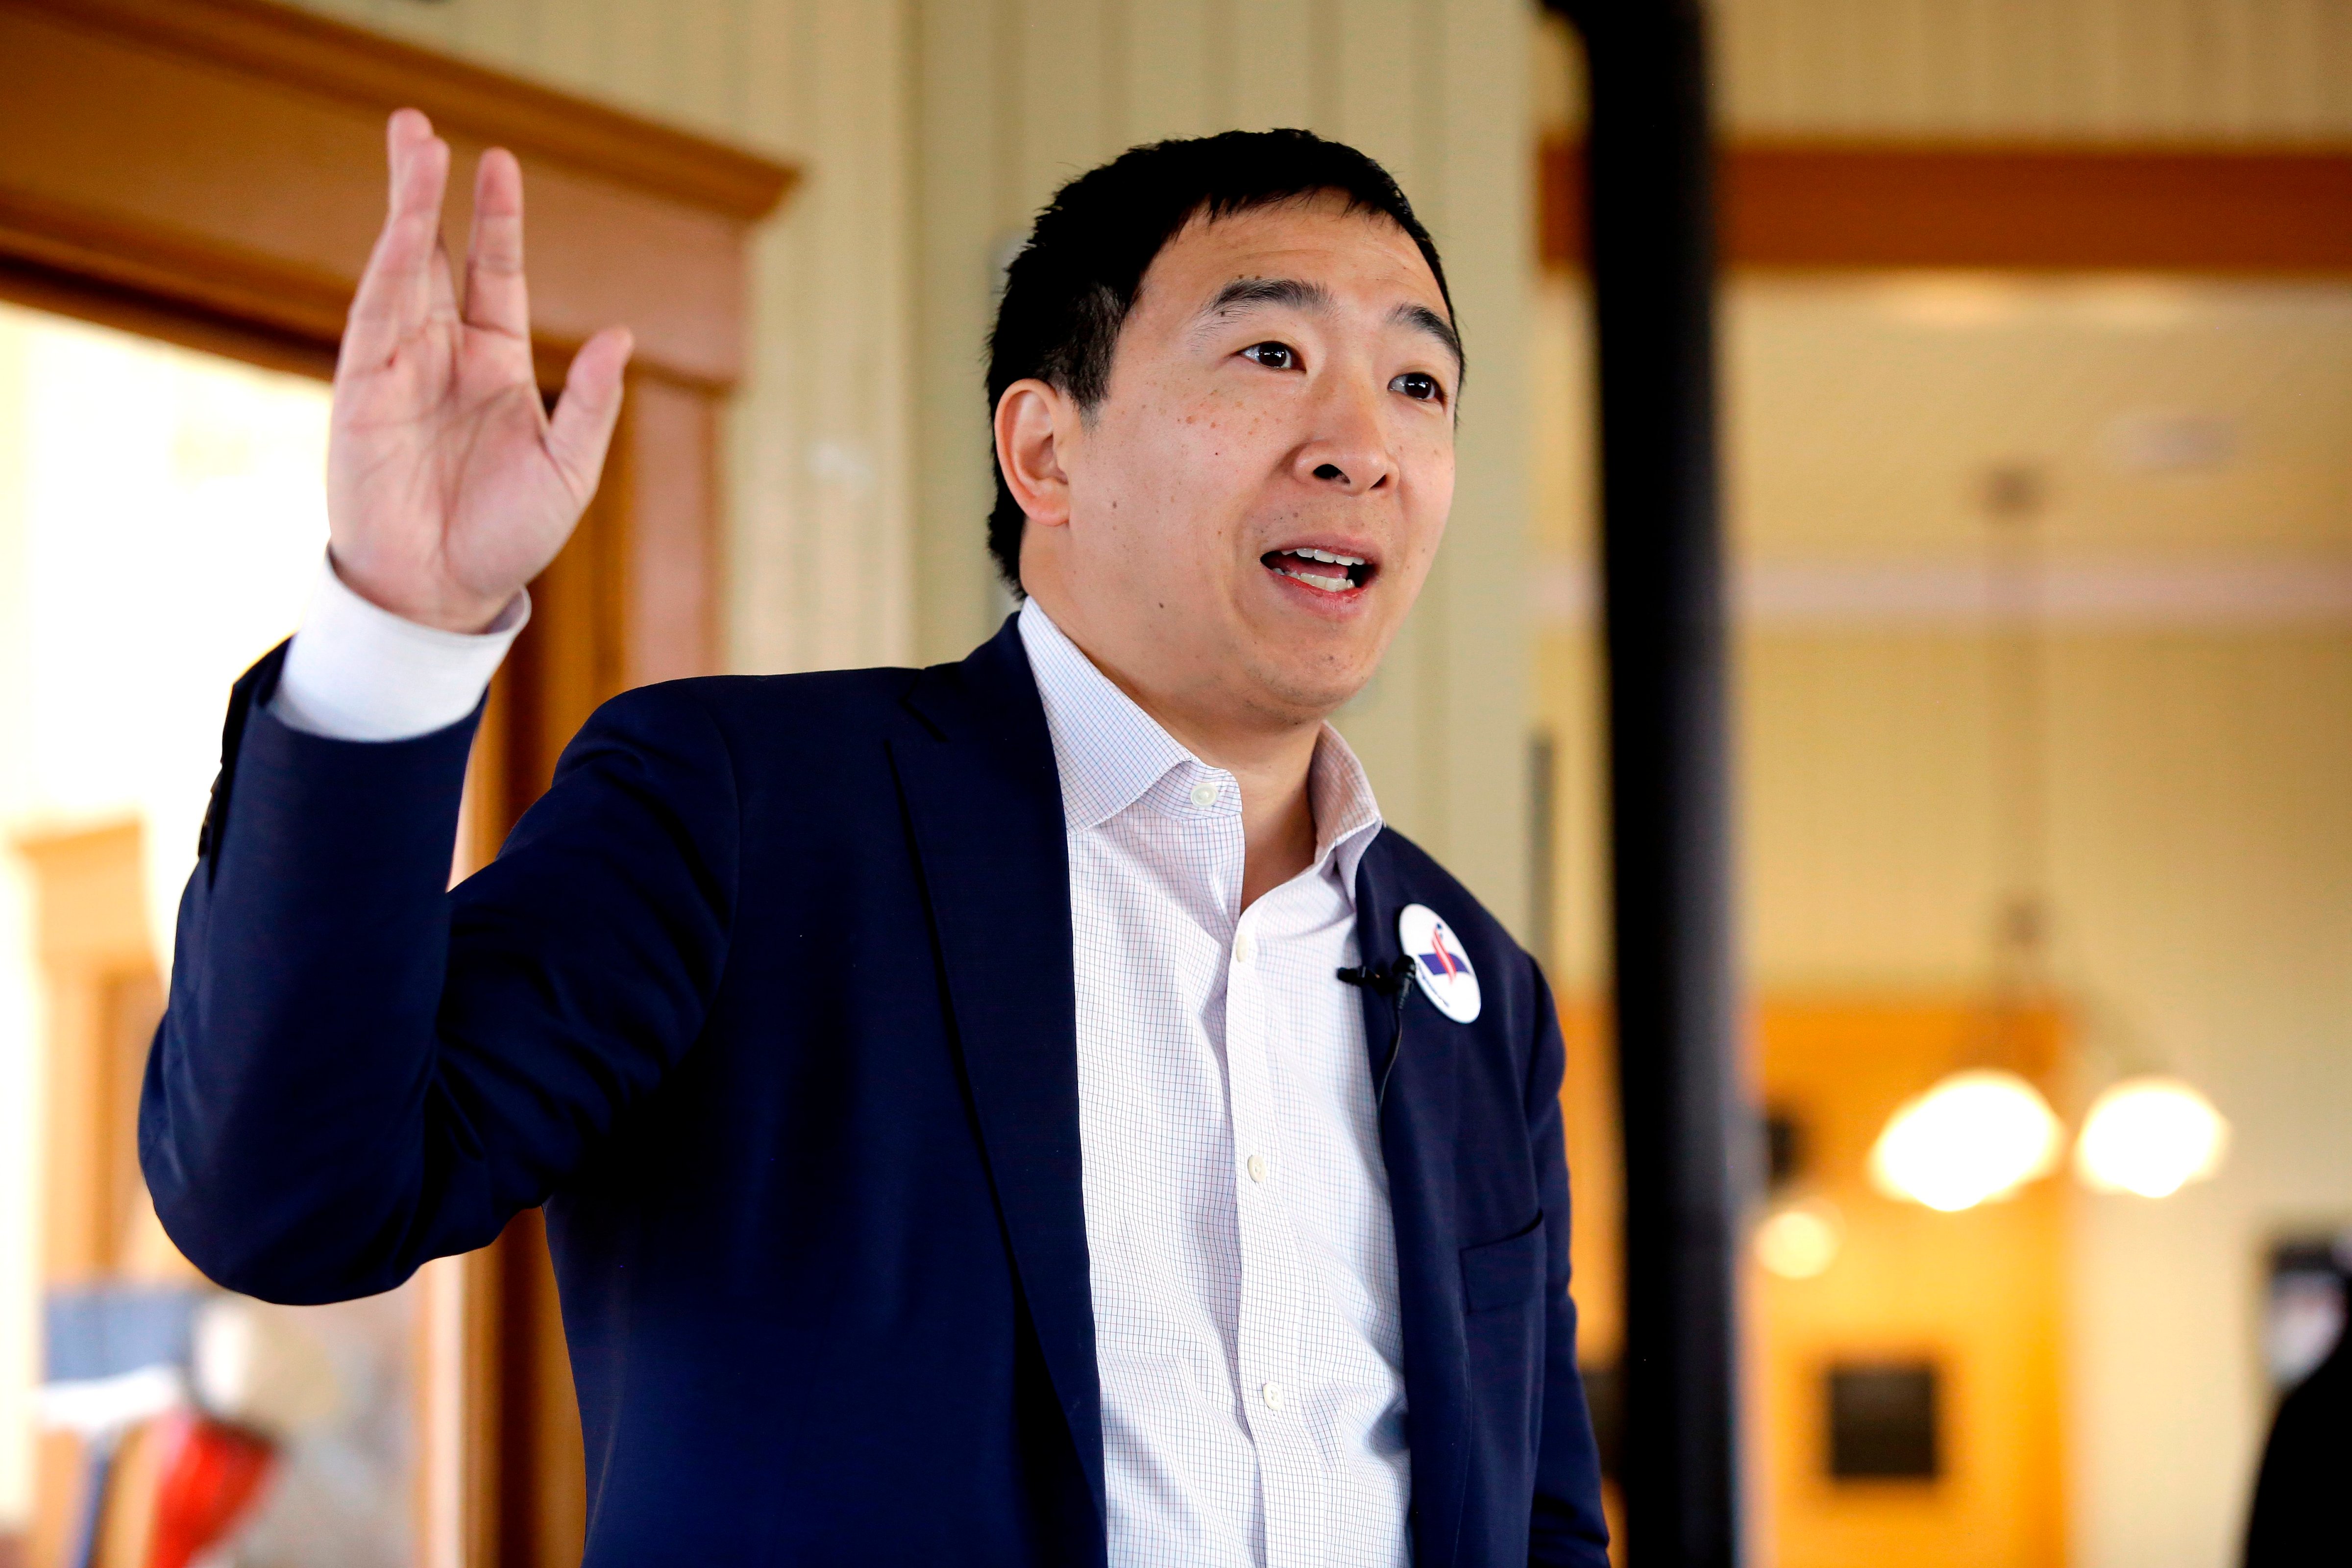 Entrepreneur and 2020 presidential candidate Andrew Yang speaks during a campaign stop at the train depot on February 1, 2019 in Jefferson, Iowa. (JOSHUA LOTT—AFP/Getty Images)